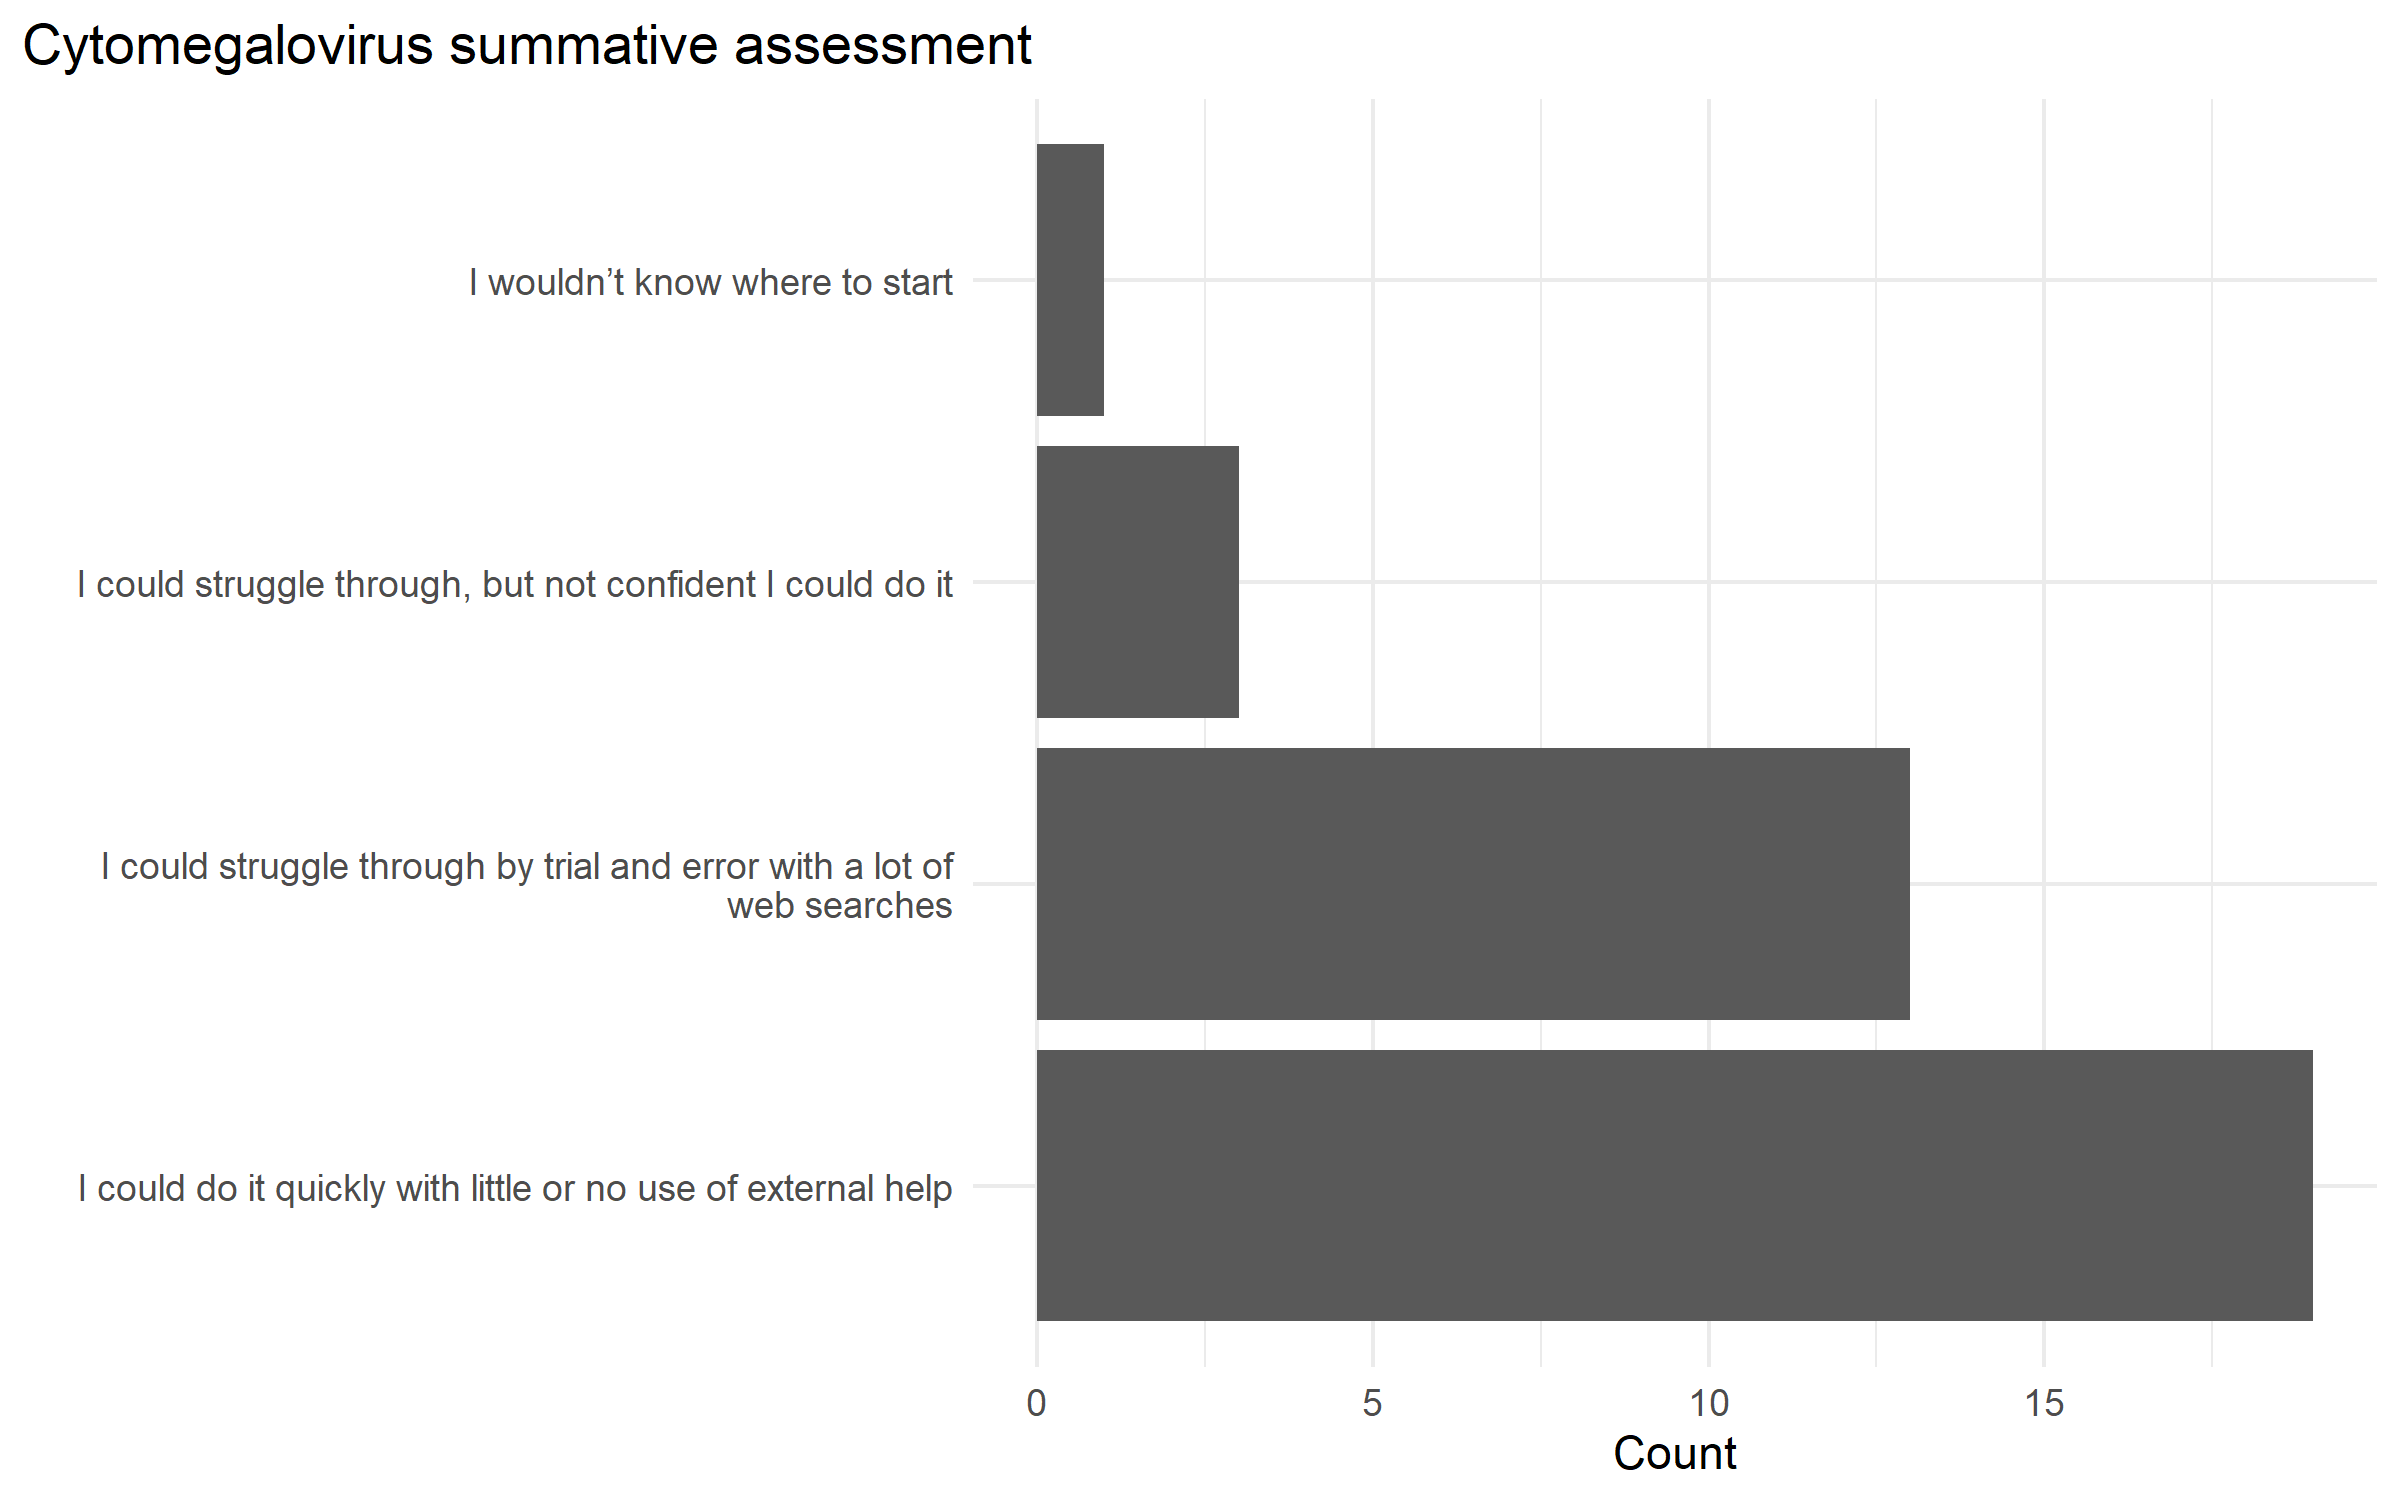 **Example summative assessment response in post-assessment survey.** The question asked the learners about a learner’s comfort and ability in loading a tabulated dataset, cleaning the data, and performing a statistical analysis to answer a question on the topic of cytomegalovirus.